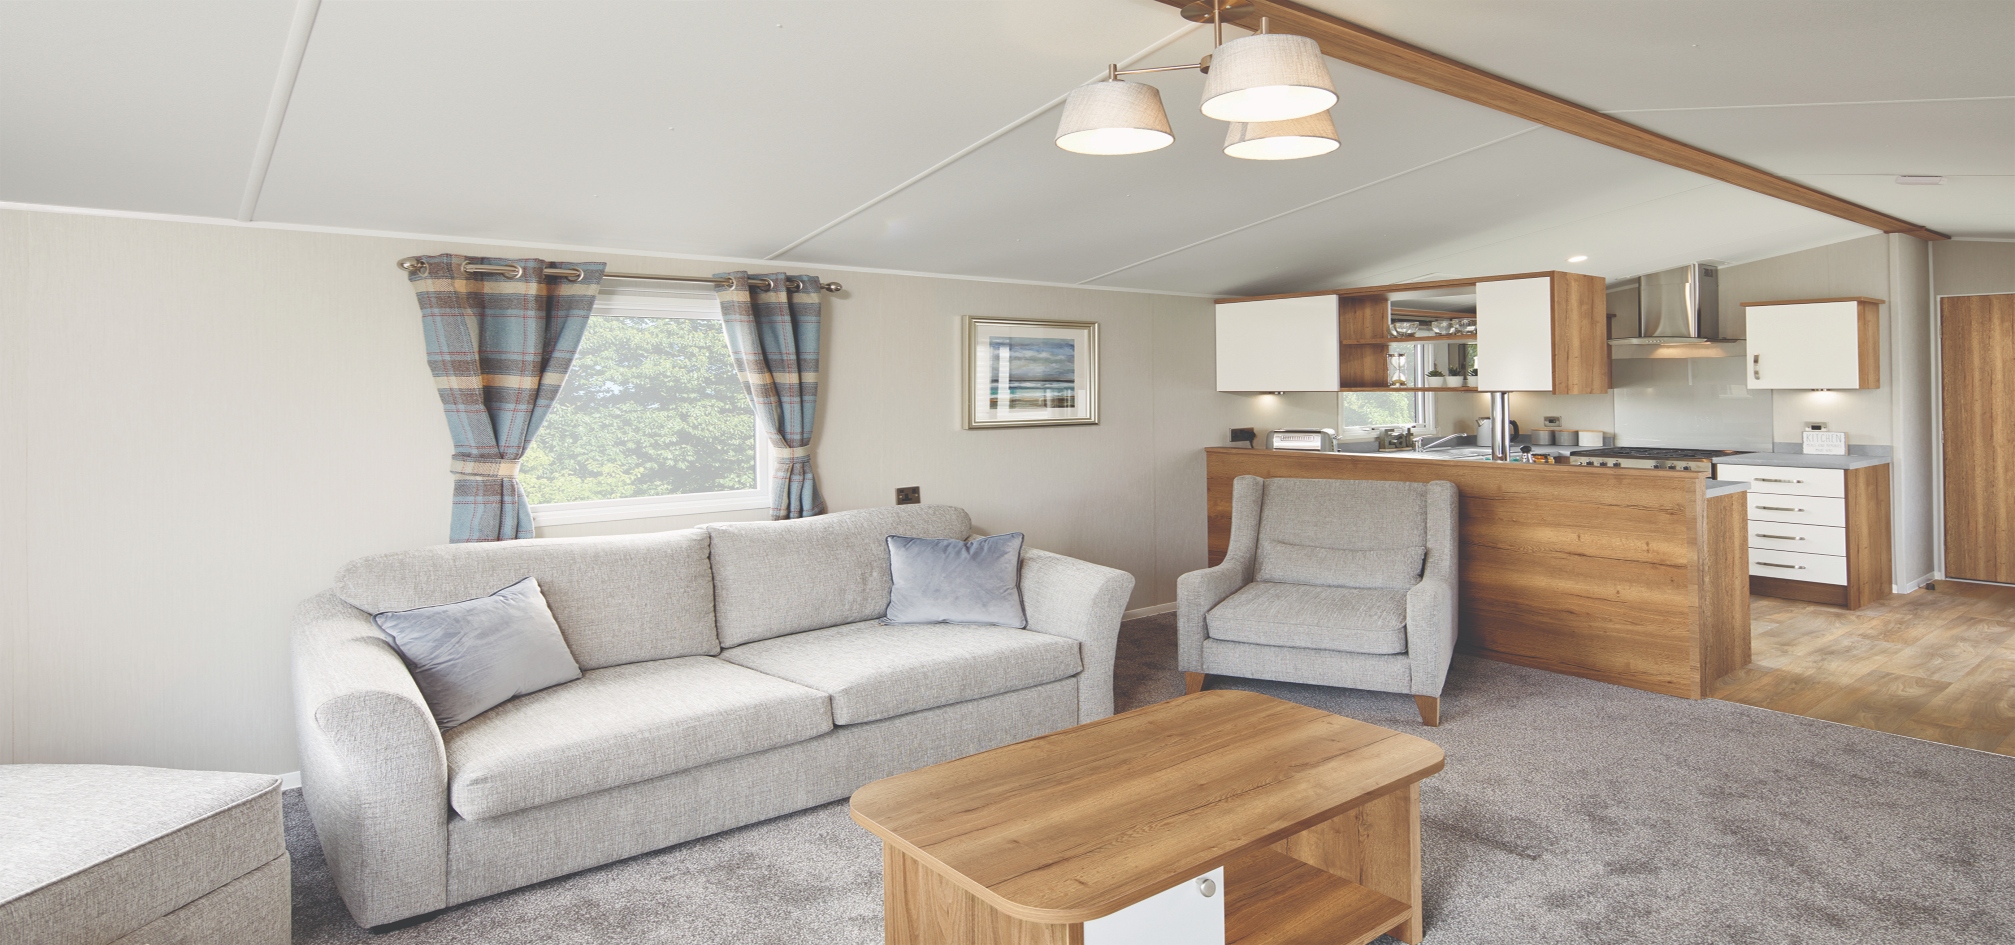 Willerby Avenmore Living Area